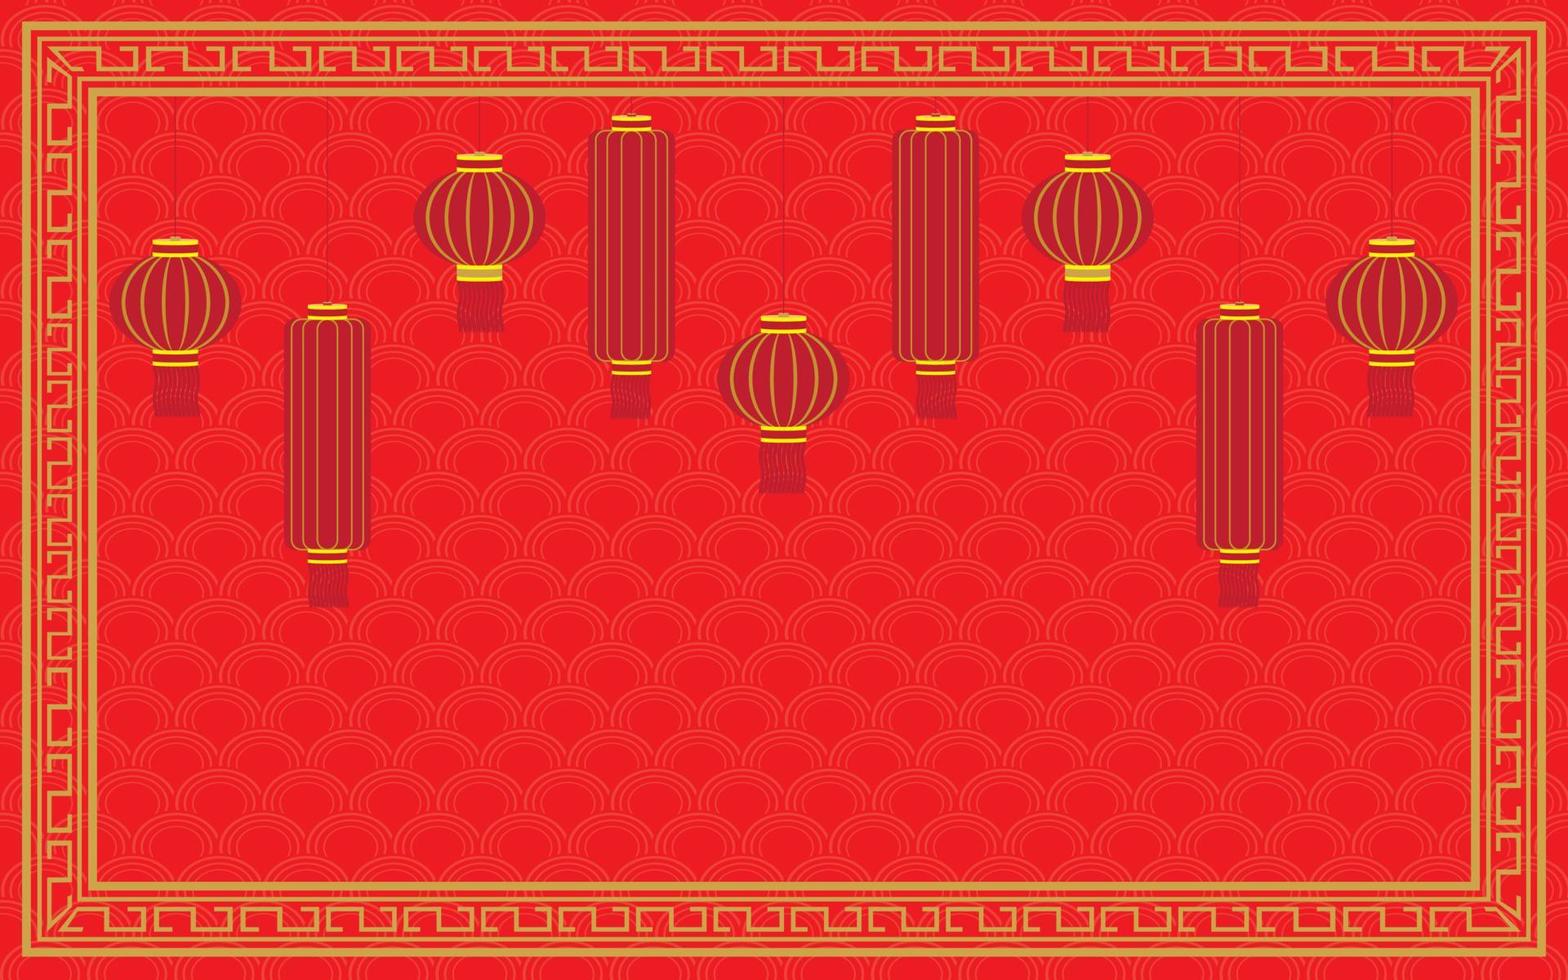 Background illustration for designing online signs or banners for Chinese New Year vector